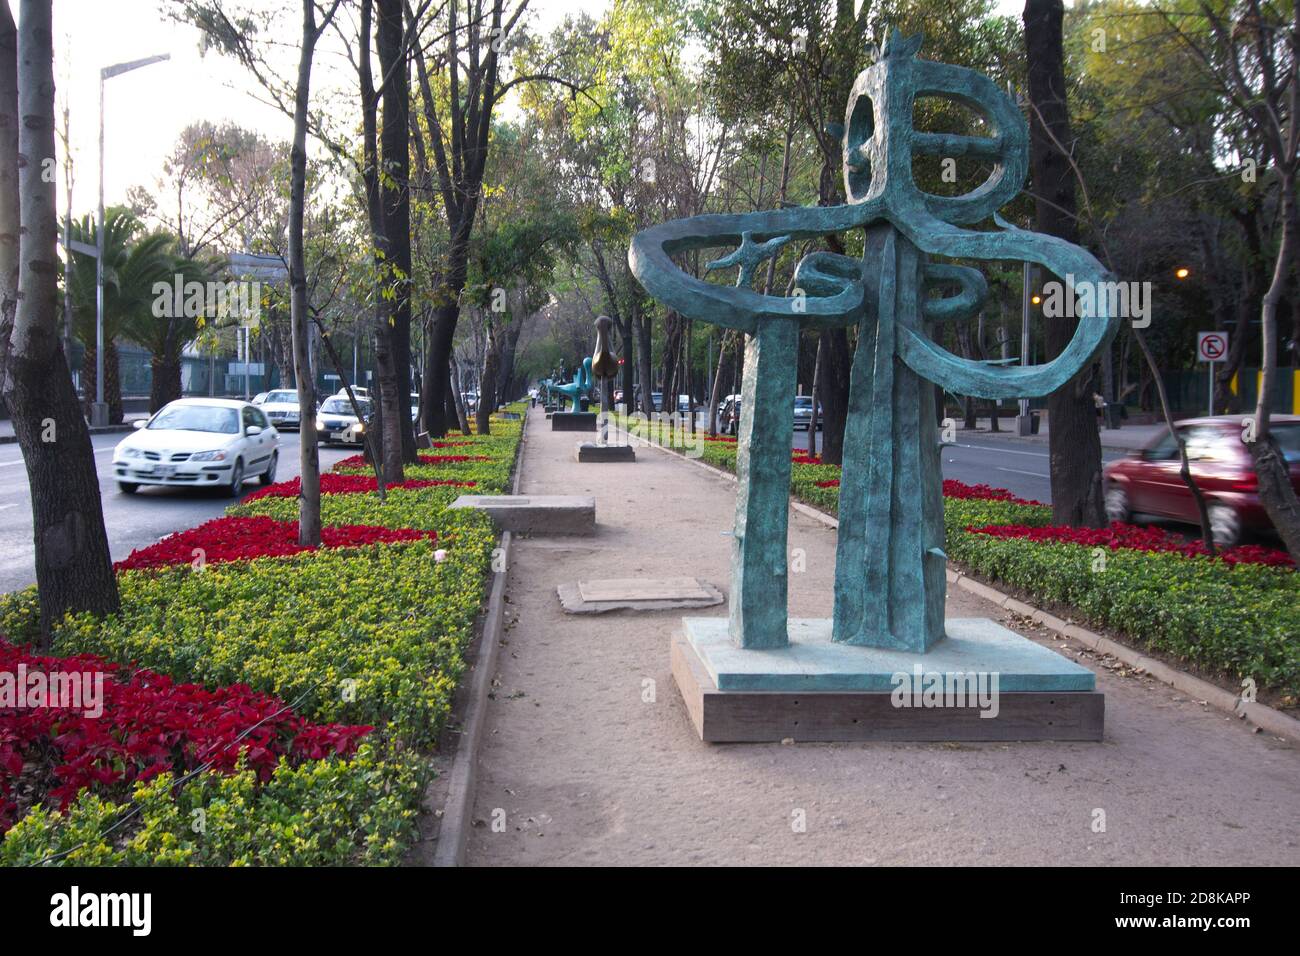 Mexico City, Mexico - 2020: View of sculptures at the median of the Paseo de la Reforma (Promenade of the Reform) avenue, which runs diagonally across Stock Photo